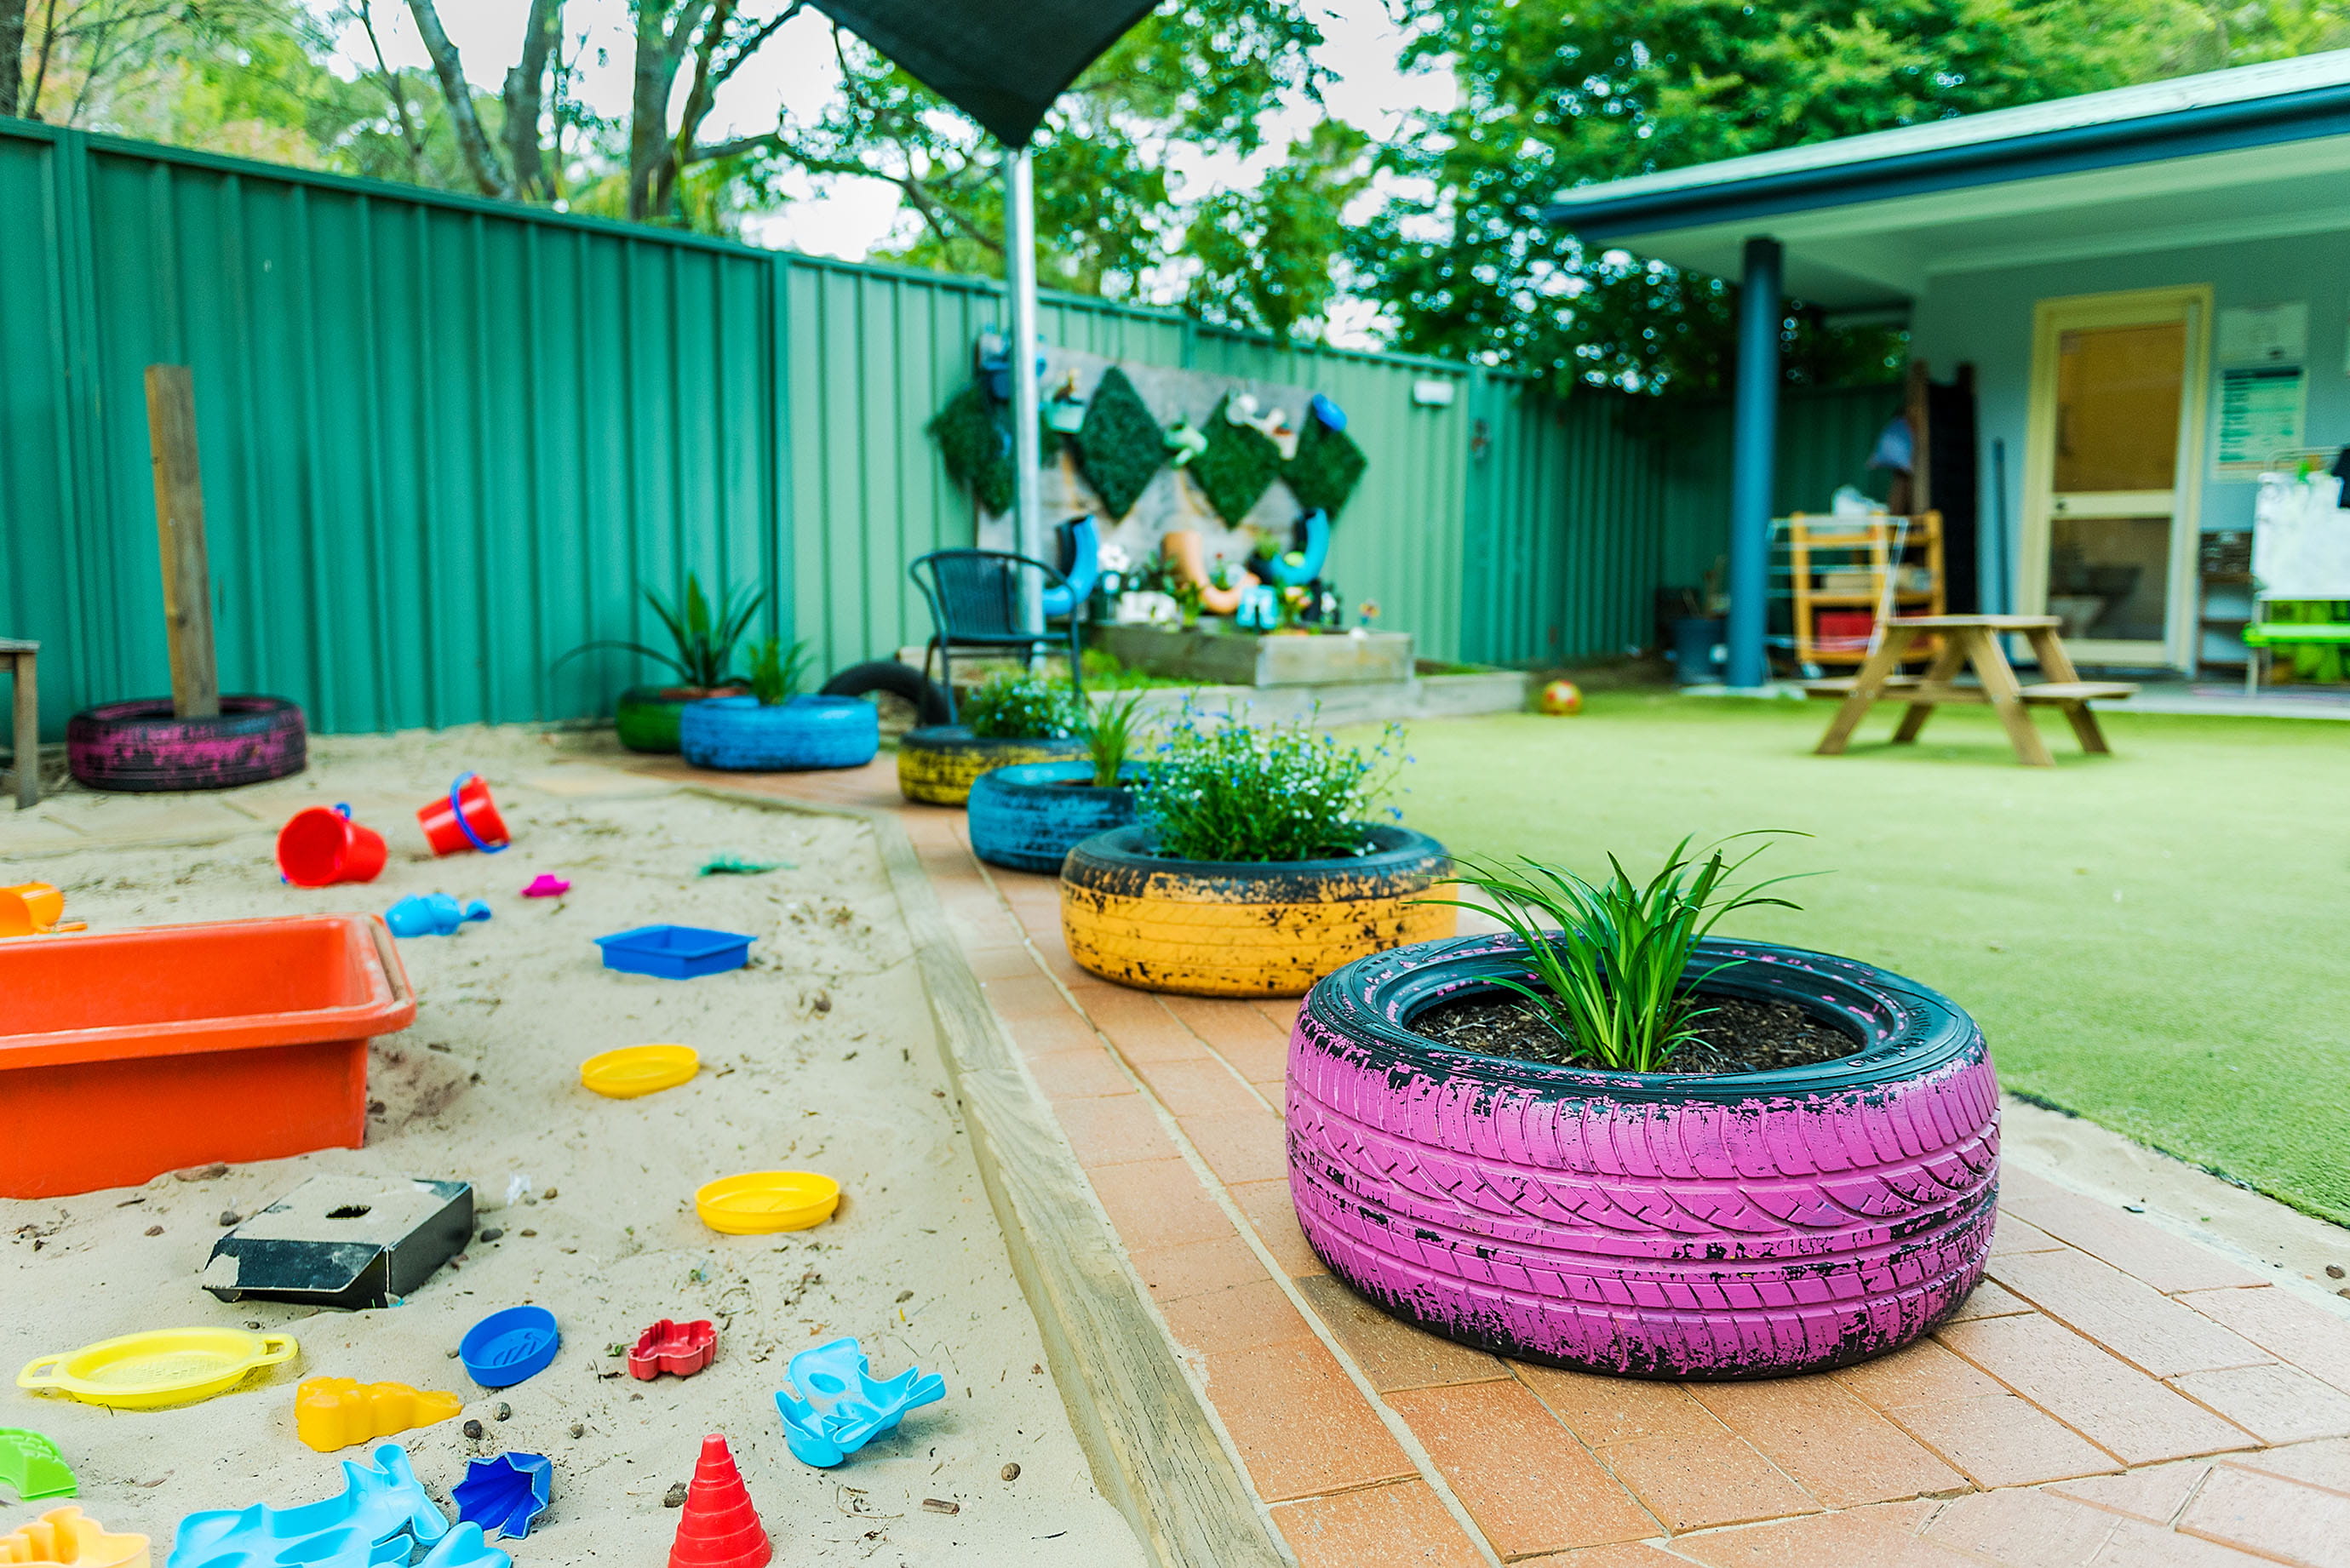 Outdoor play area at Ourimbah First Grammar